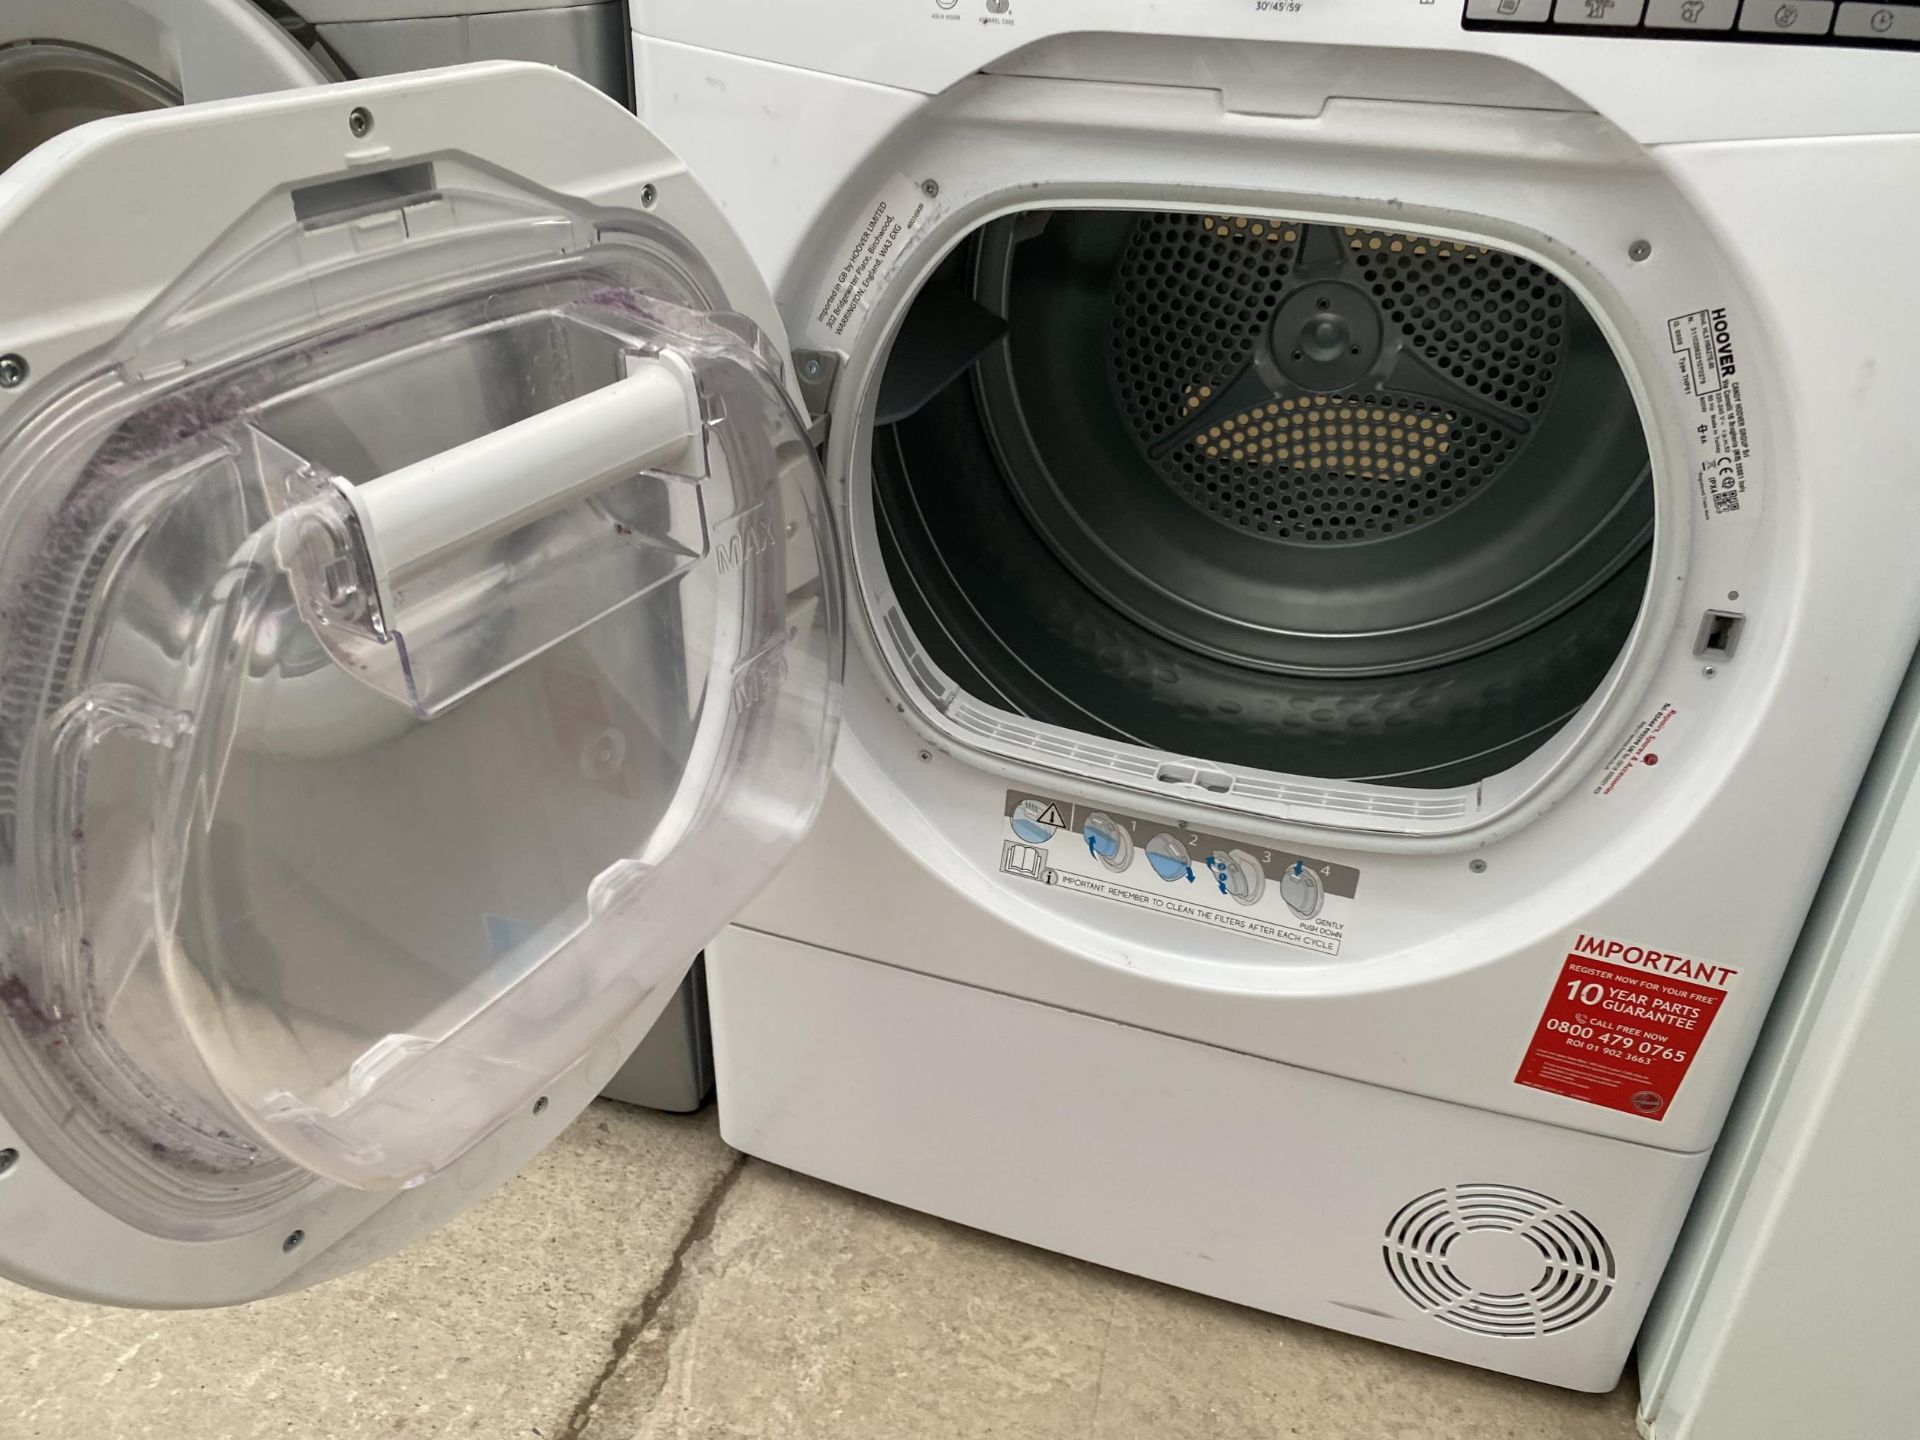 A WHITE HOOVER 8KG TUMBLE DRYER - Image 3 of 3